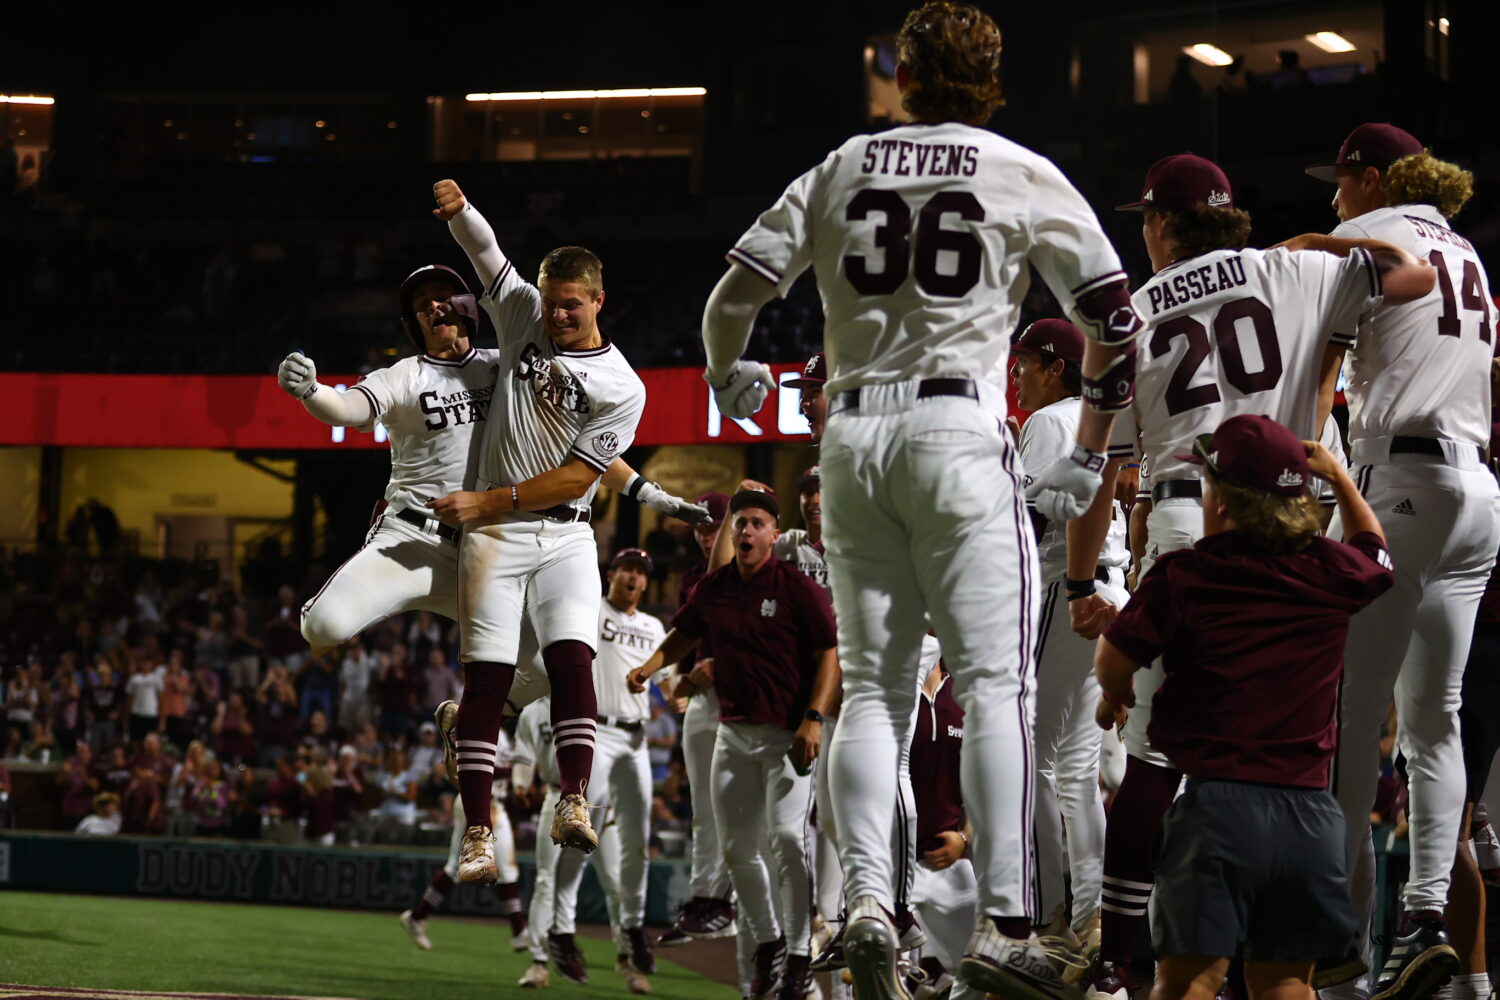 Baseball: Powell blasts three homers to bail out Mississippi State against North Alabama